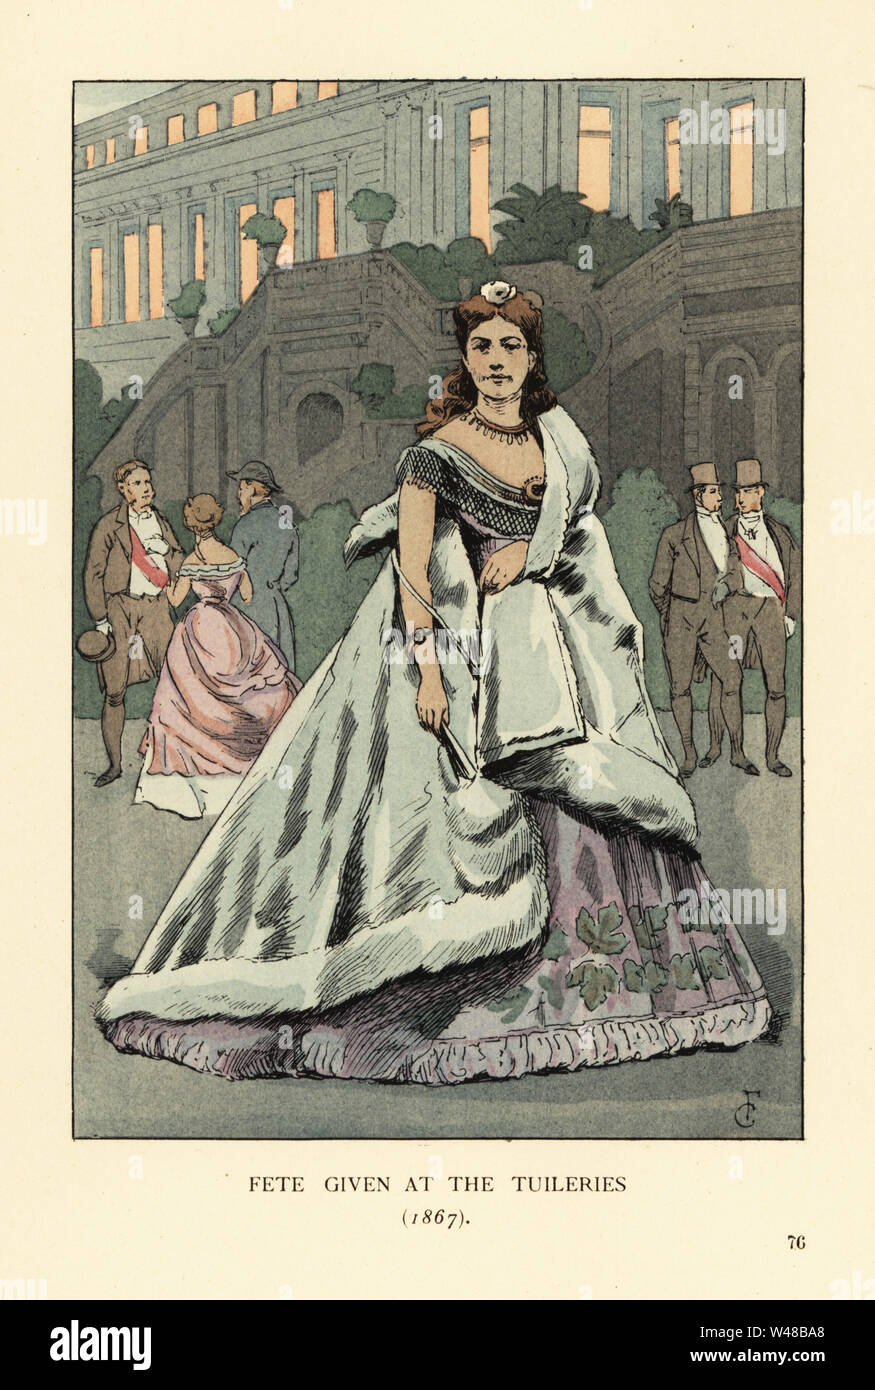 Fete given at the Tuileries, 1867. Woman in crinoline ball gown and fur cape, men in evening attire with sash. The Gala soirée of 10 June 1867 was held for sovereigns attending the International Exposition. Handcoloured lithograph by R.V. after an illustration by Francois Courboin from Octave Uzanne’s Fashion in Paris, William Heinemann, London, 1898. Stock Photo